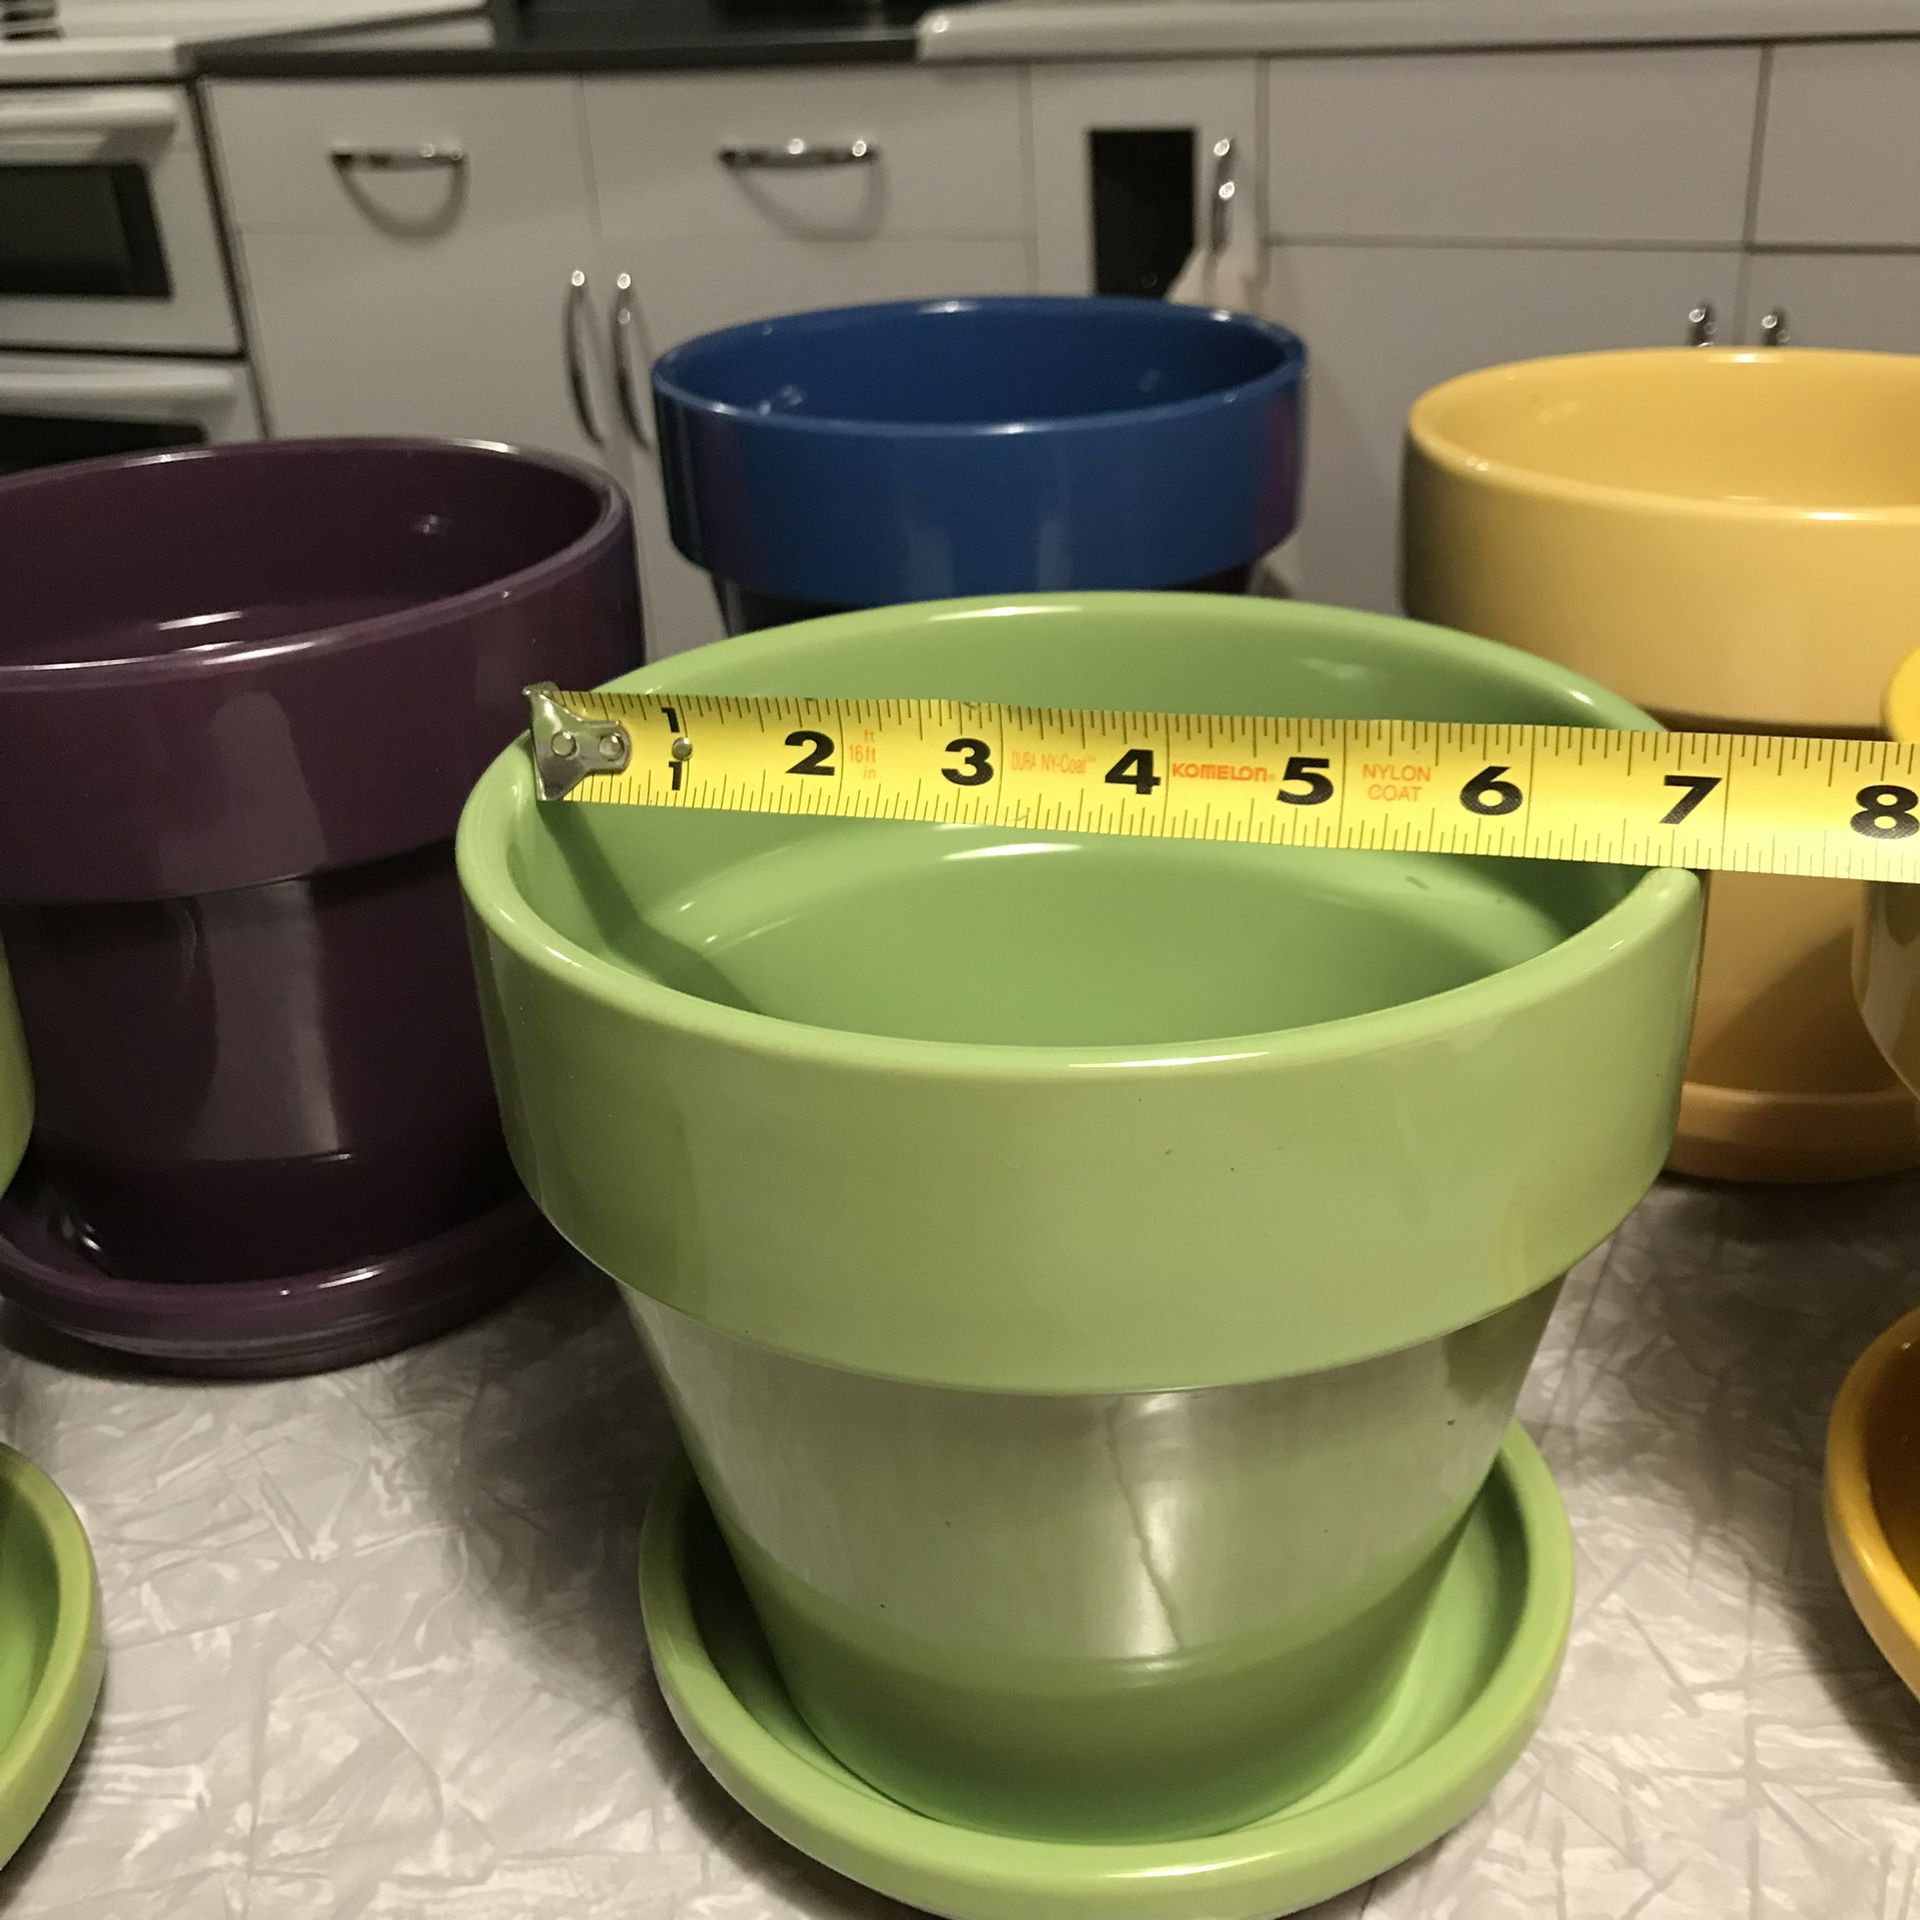 6 Ceramic Flower Pots With Saucers